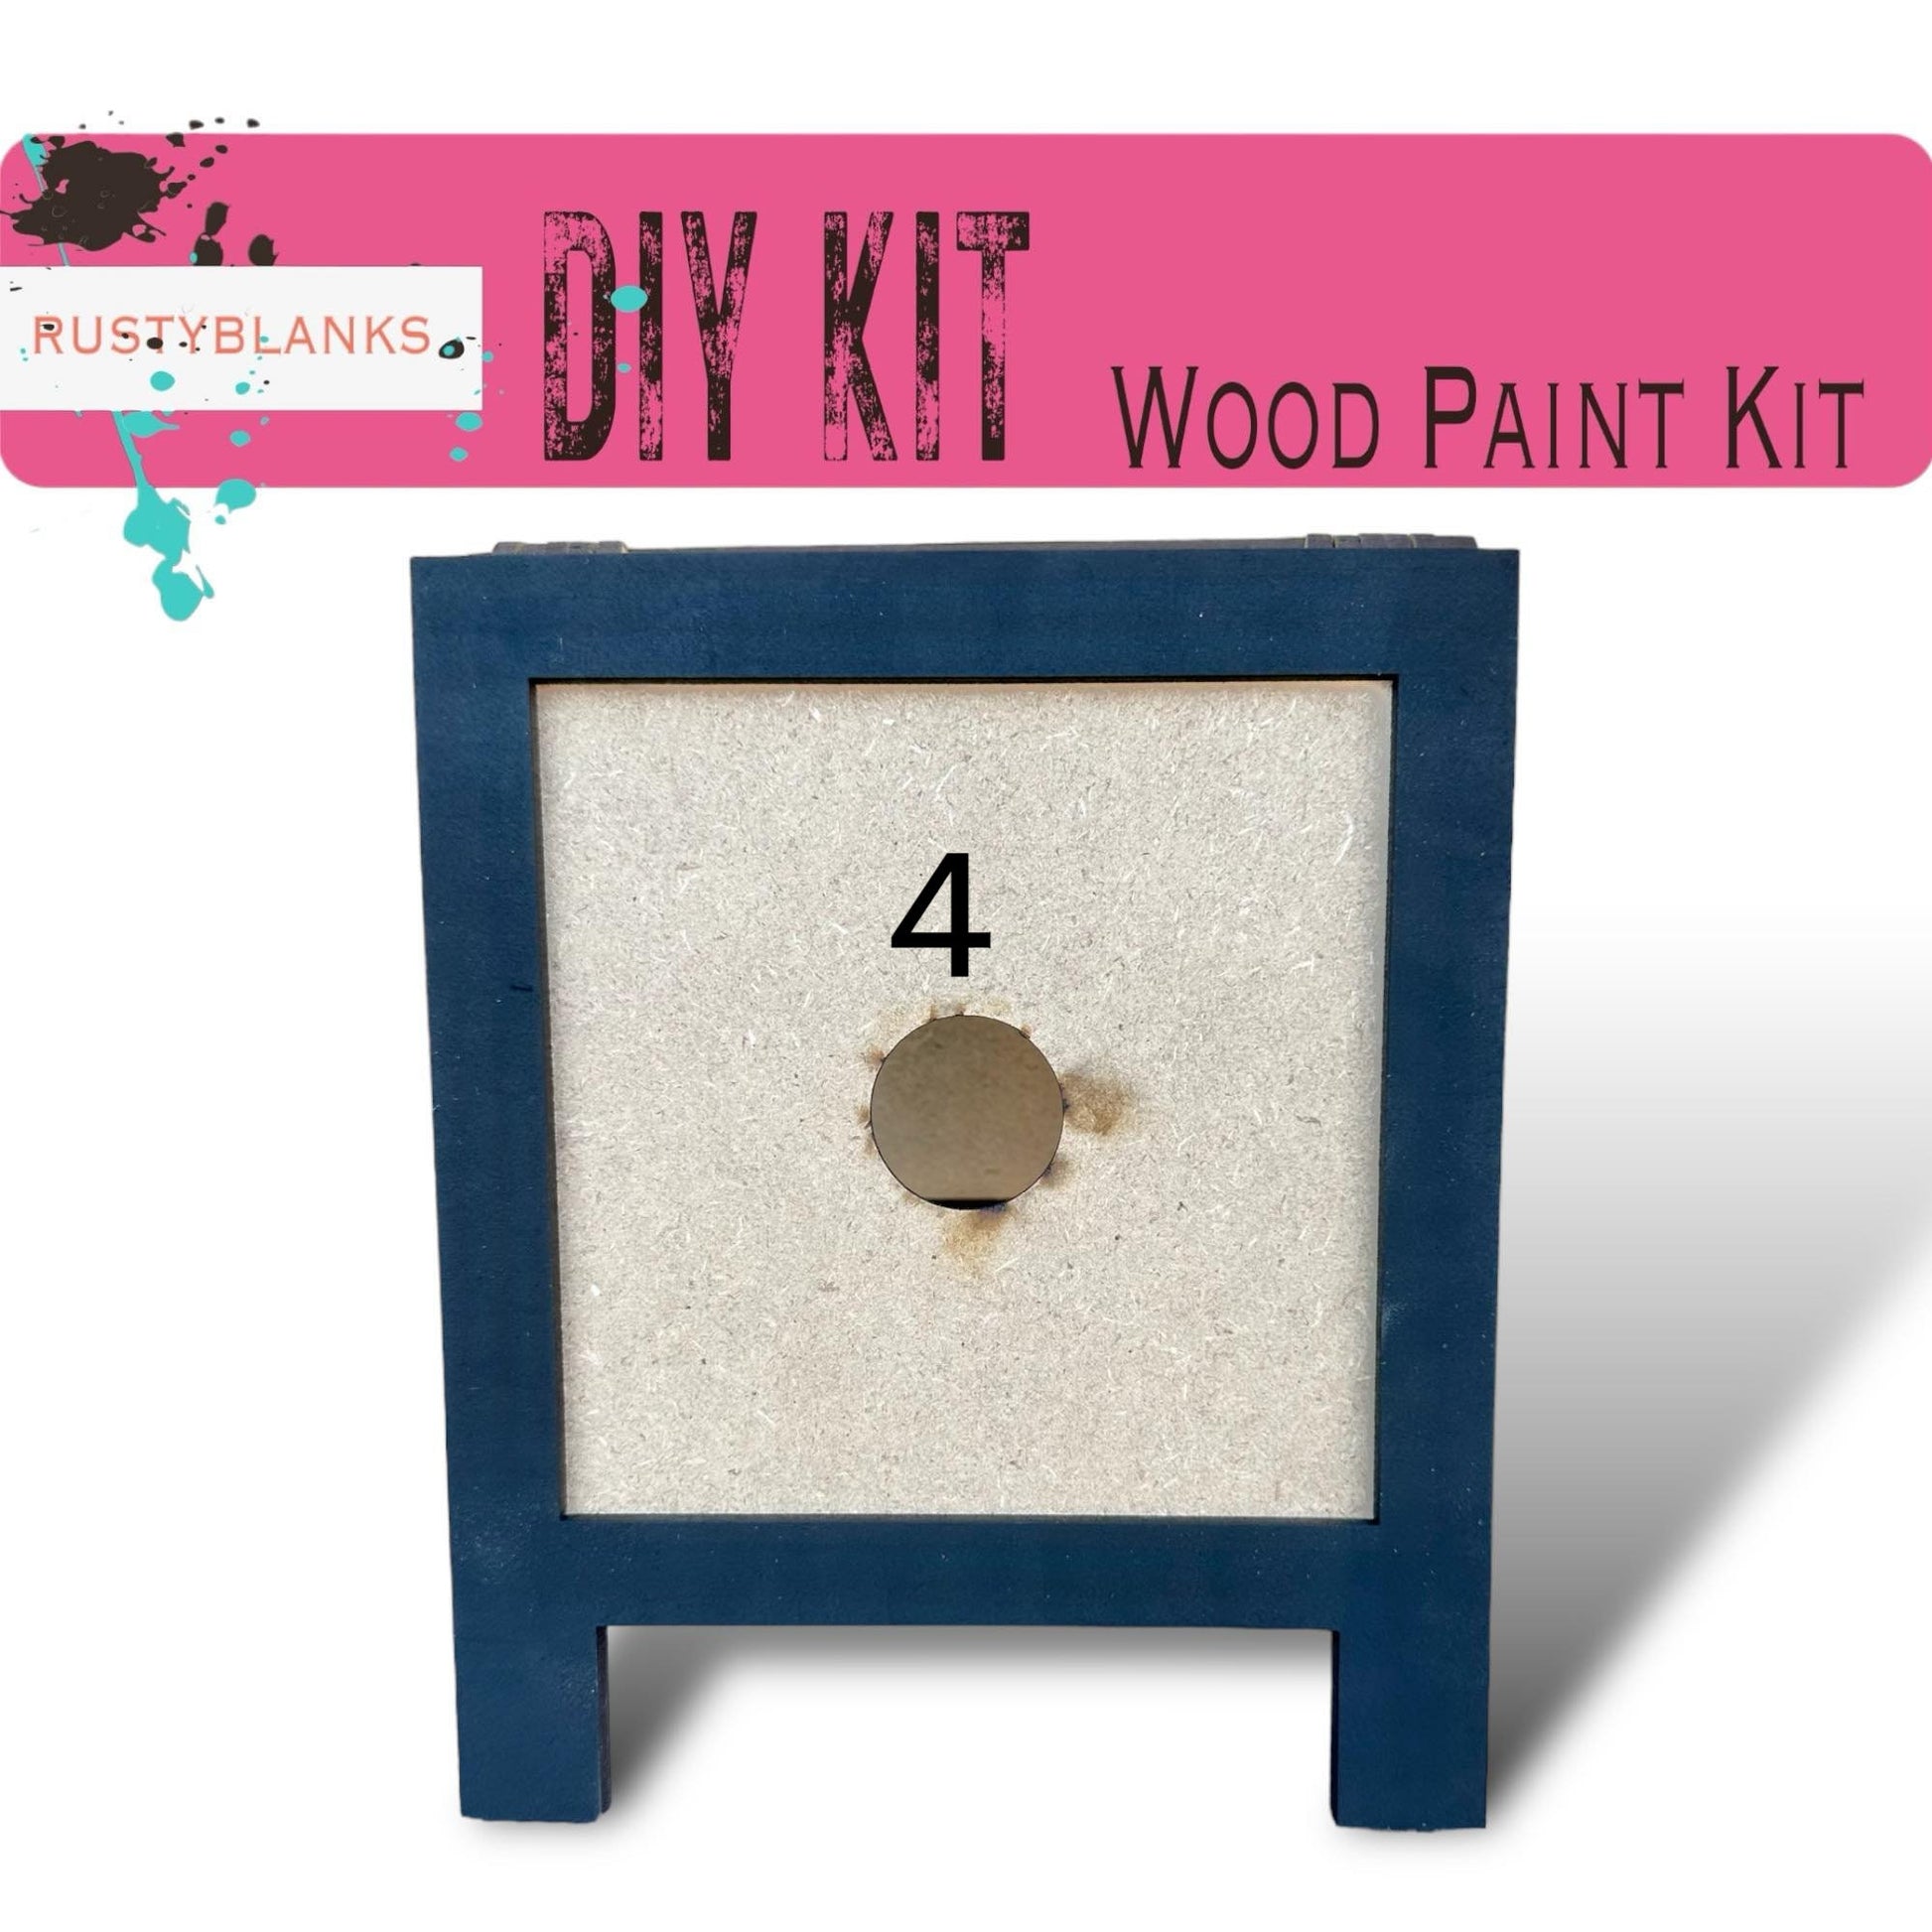 a wooden paint kit with a hole in it